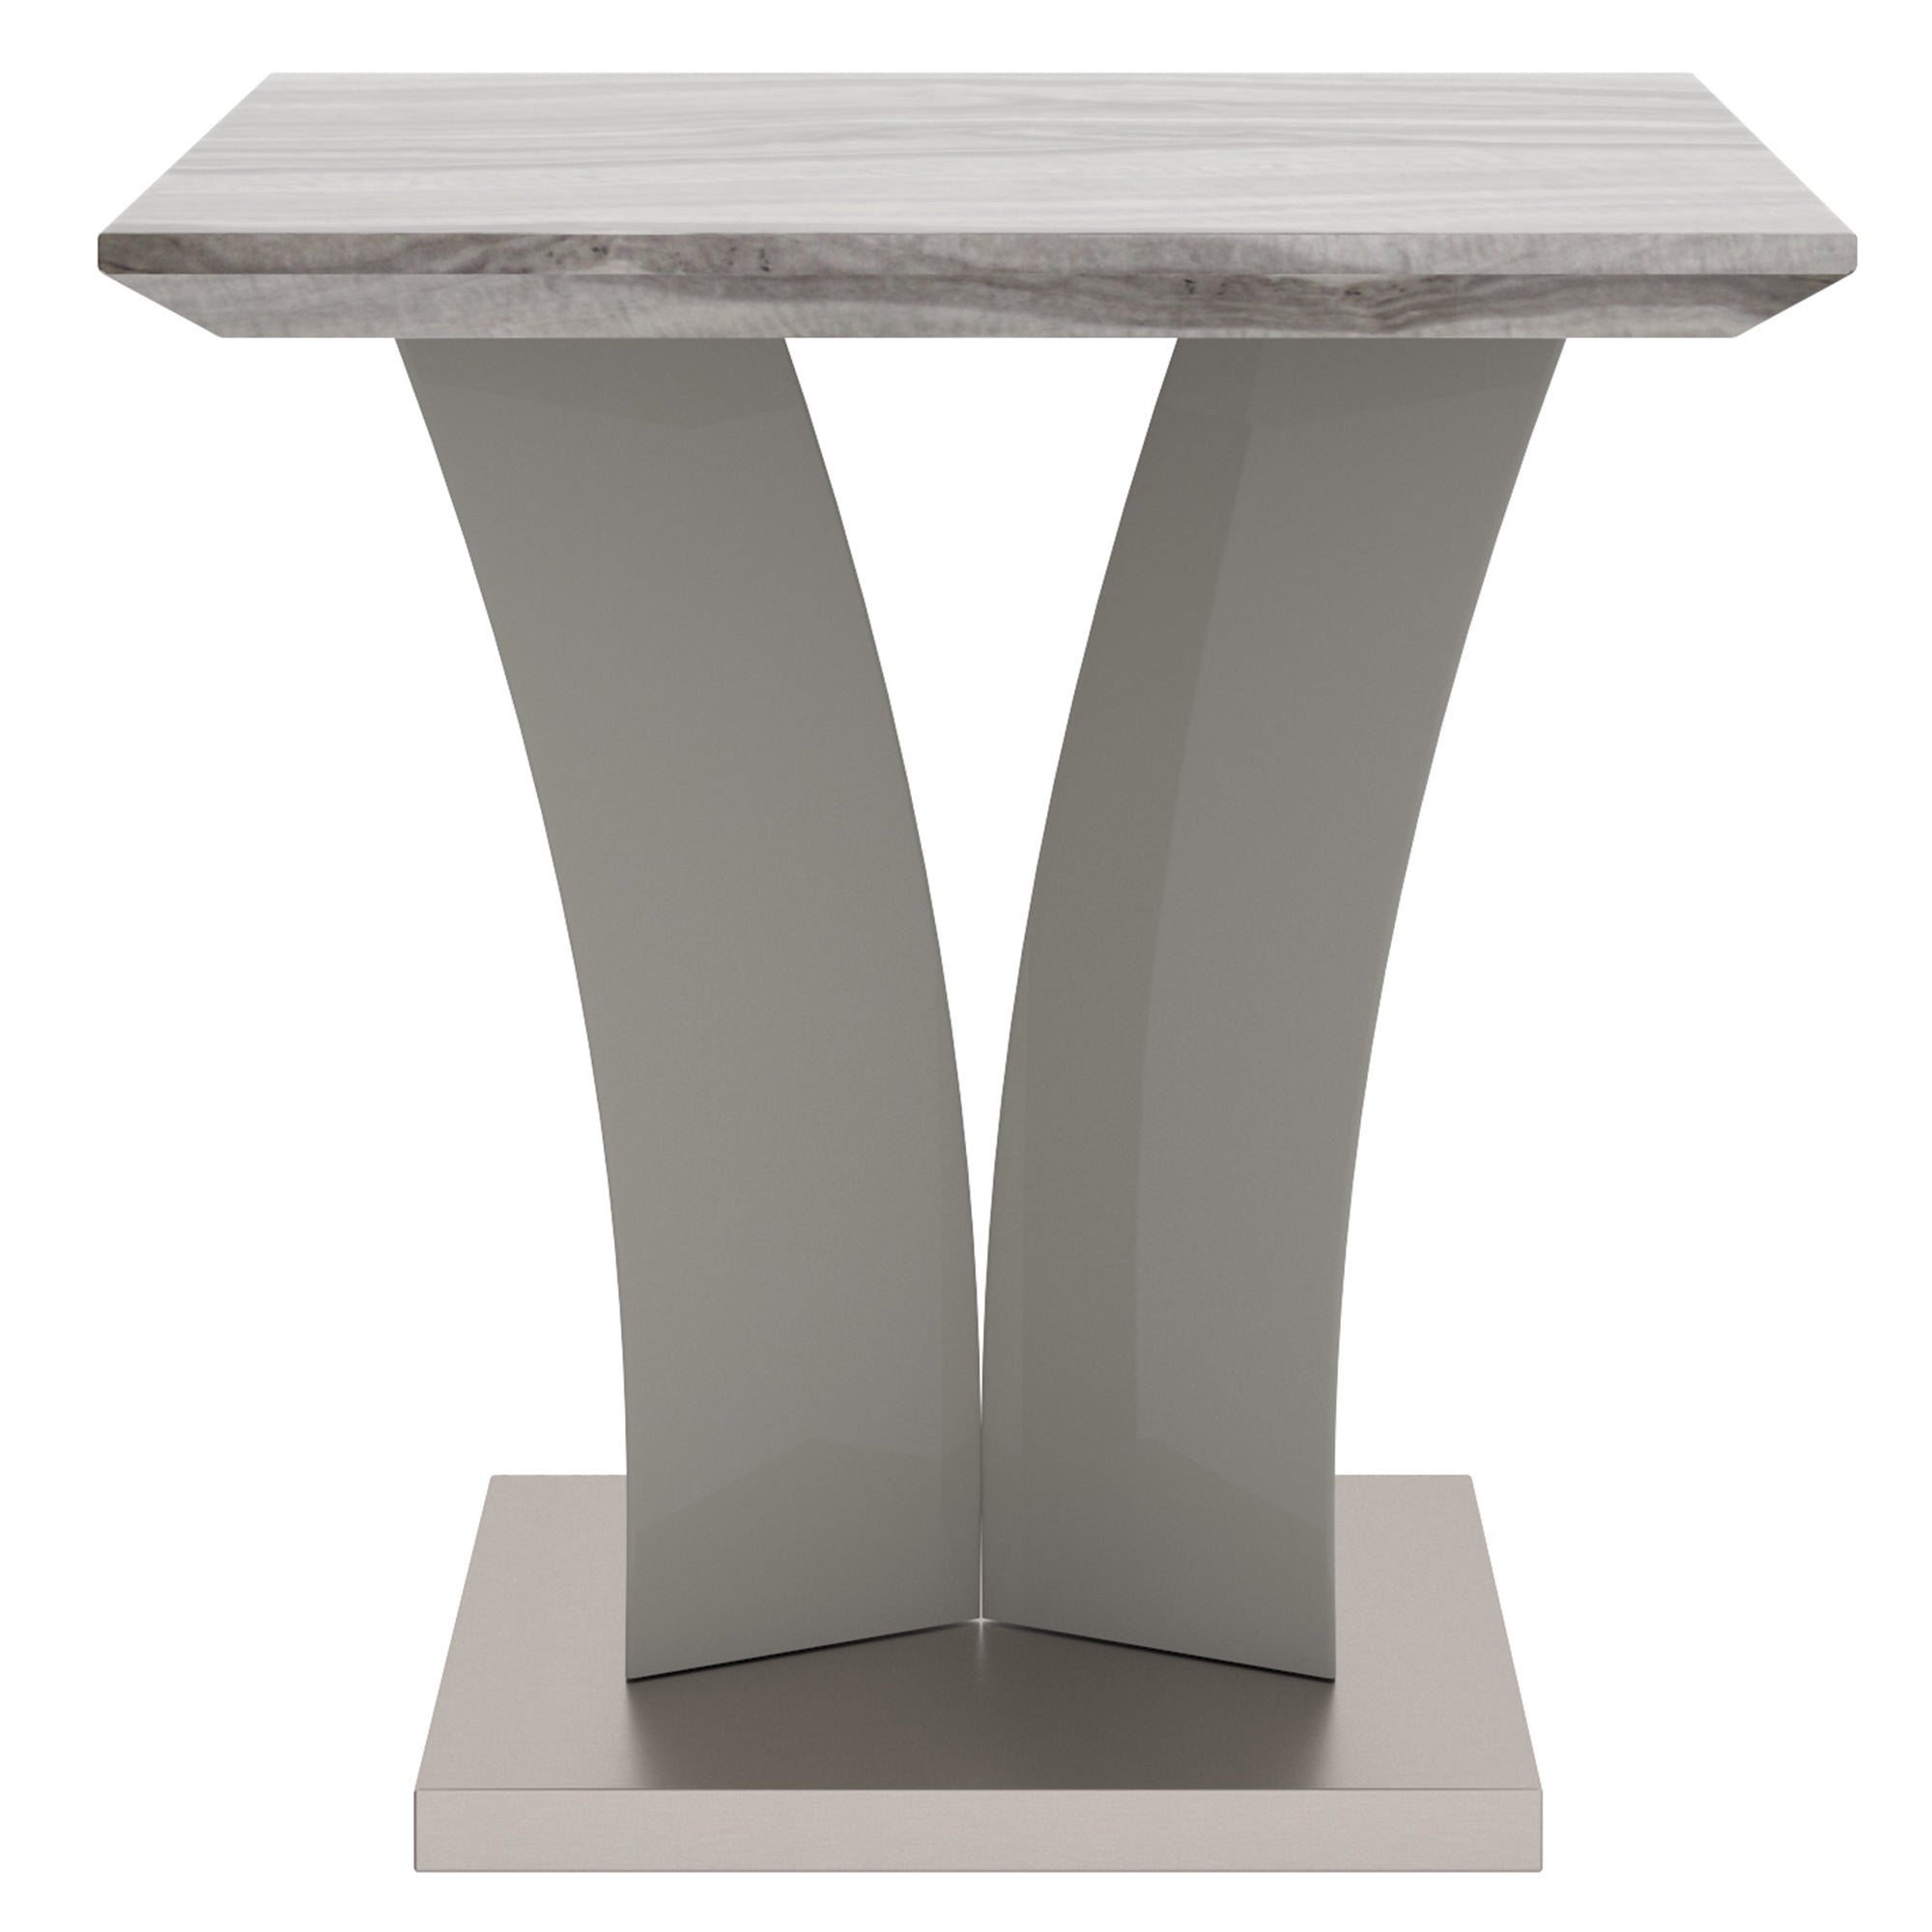 Napoli Accent Table in Light Grey 501-545GY